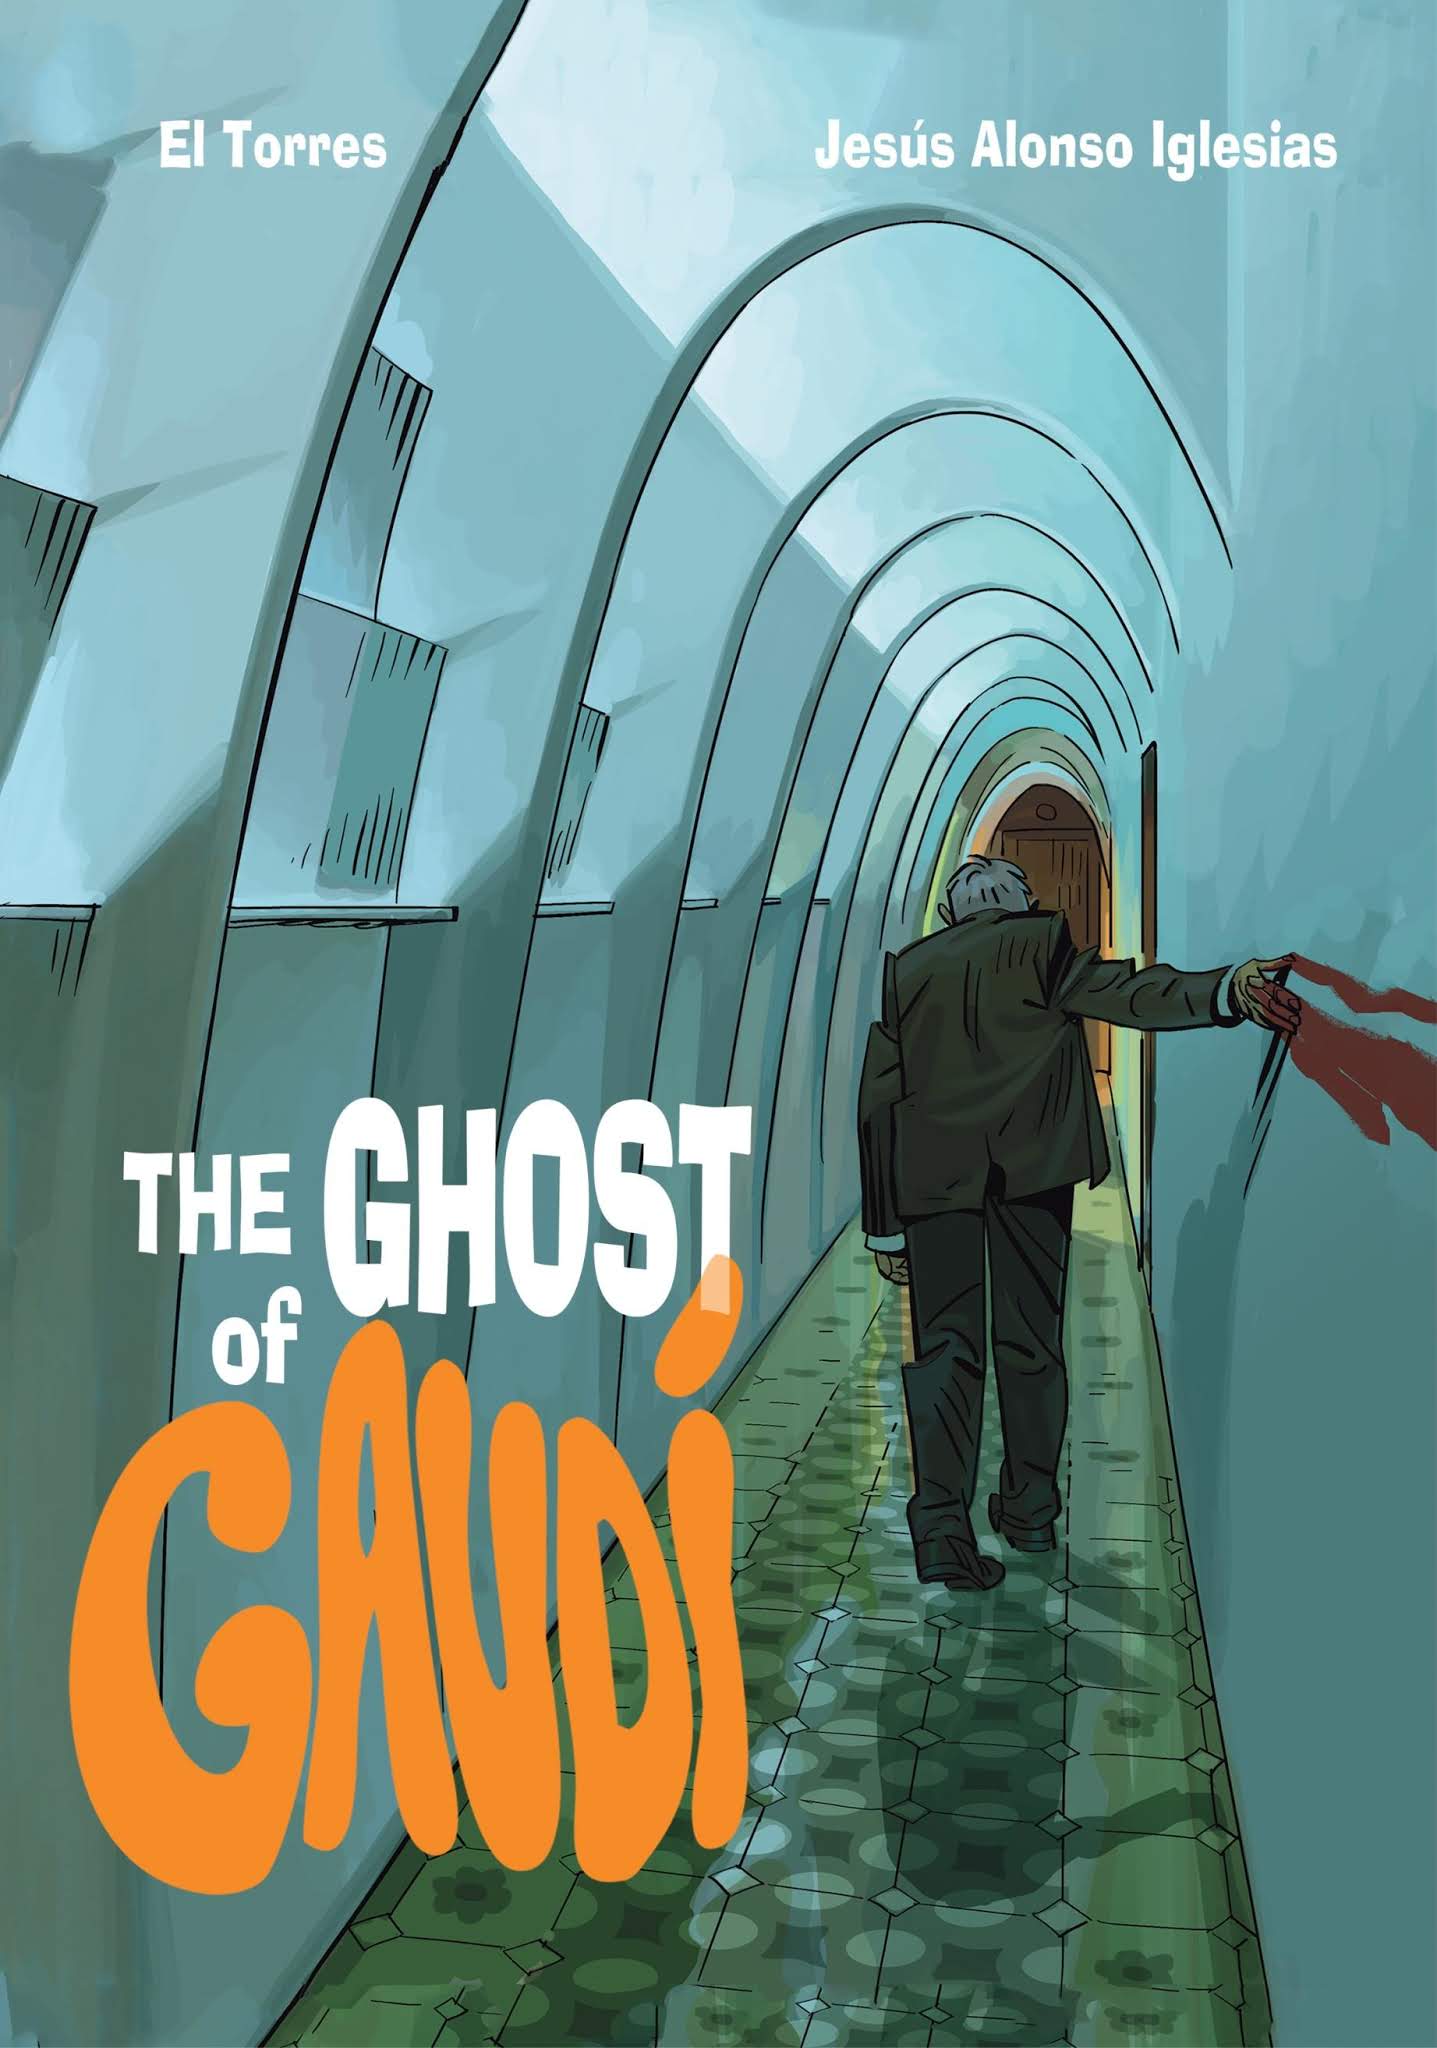 Read online The Ghost of Gaudi comic -  Issue # TPB - 1